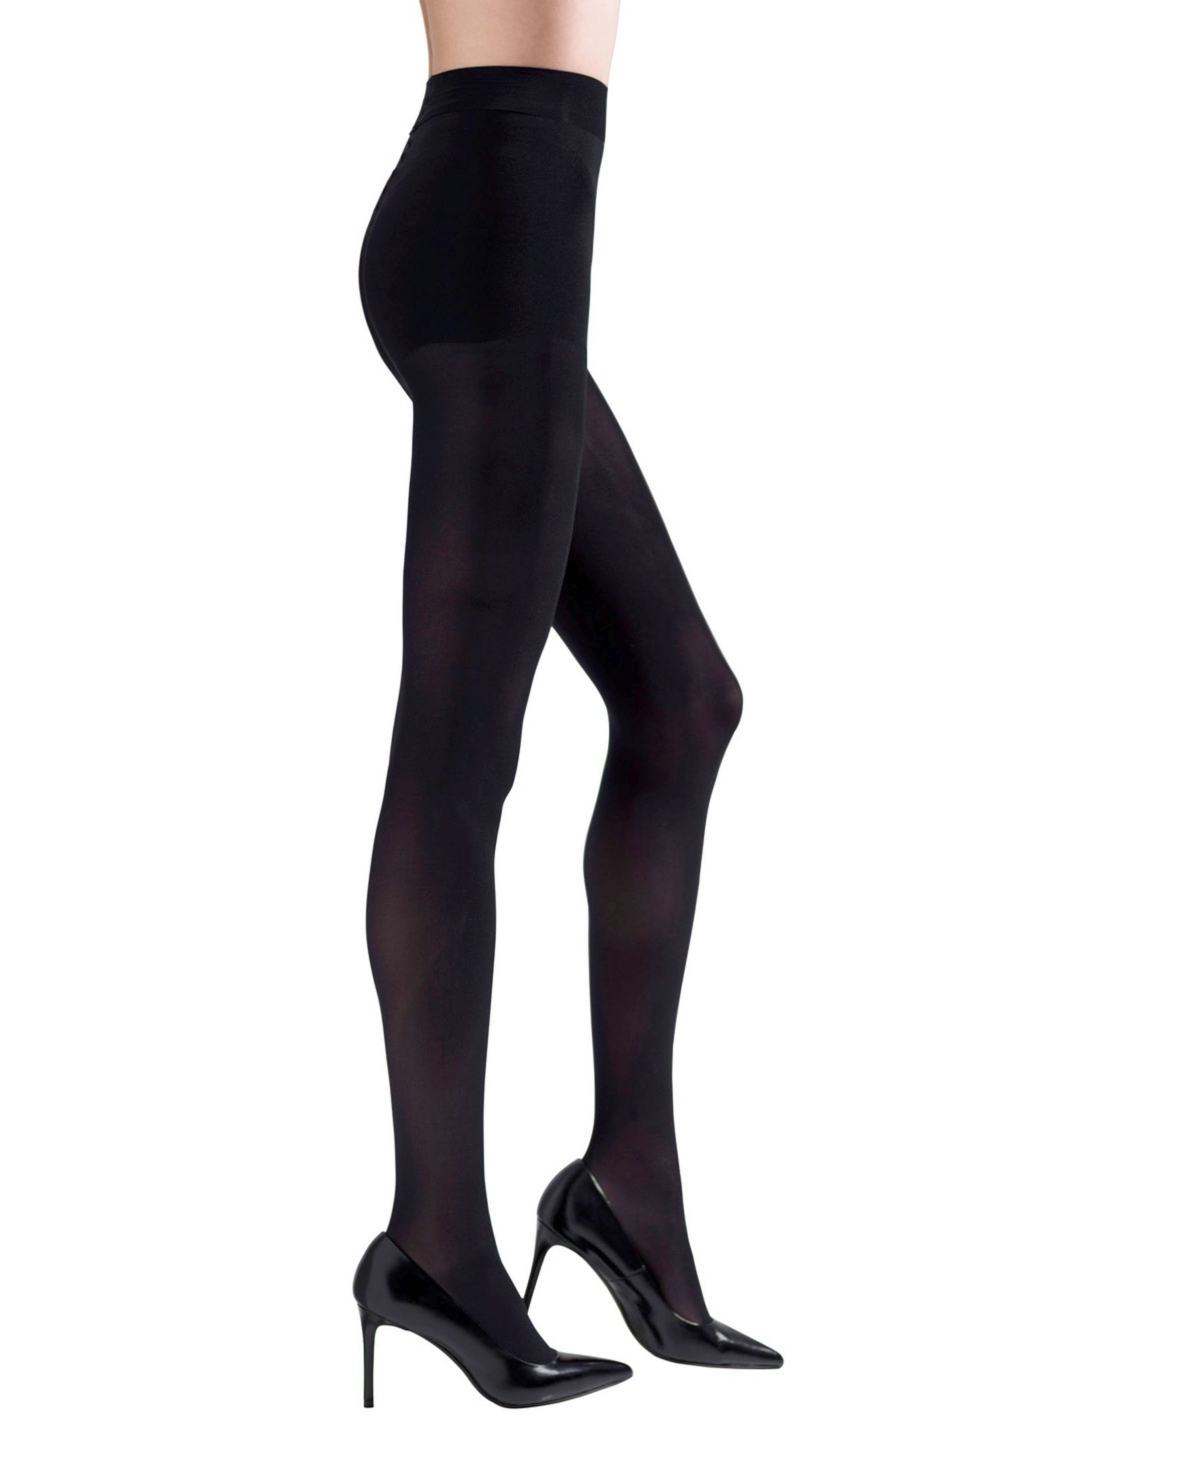 Women's Firm Fitting Opaque Control Top 2-Pk. Tights - Black